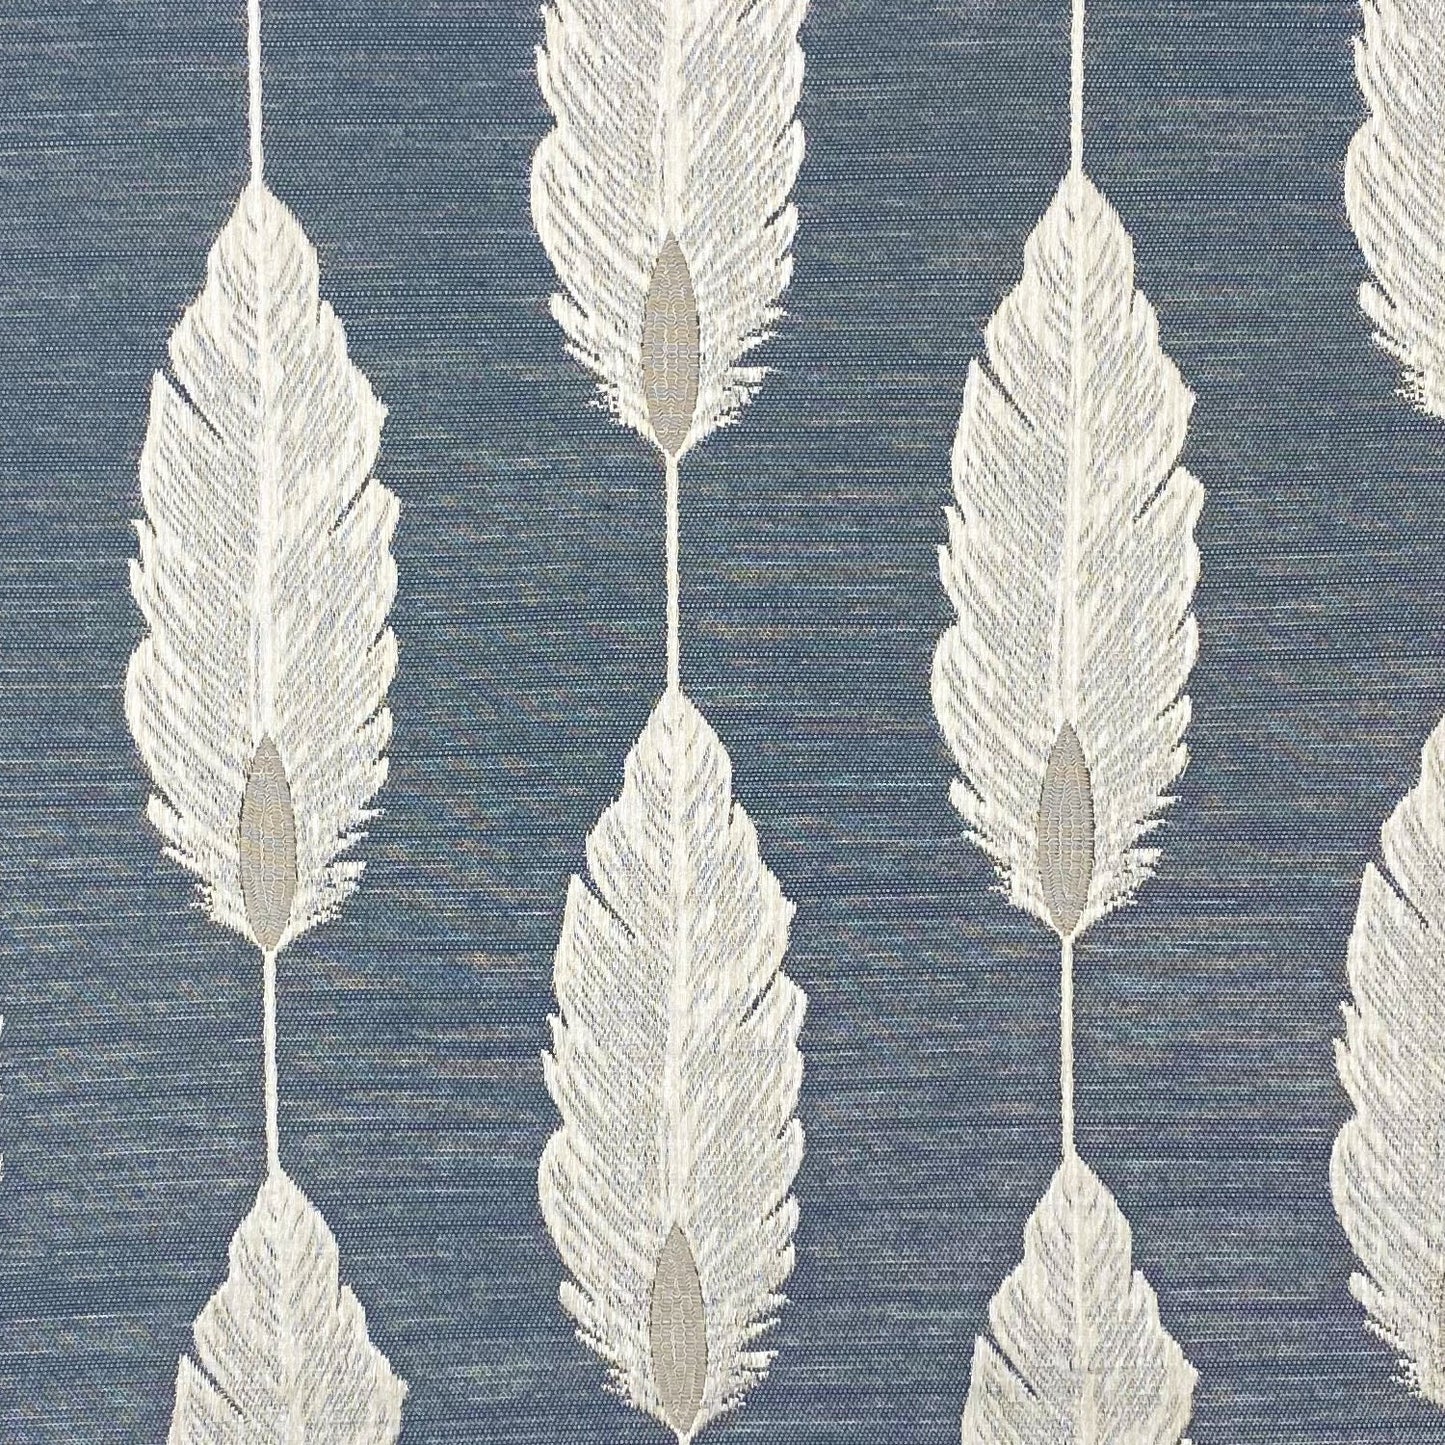 Feather Fabric